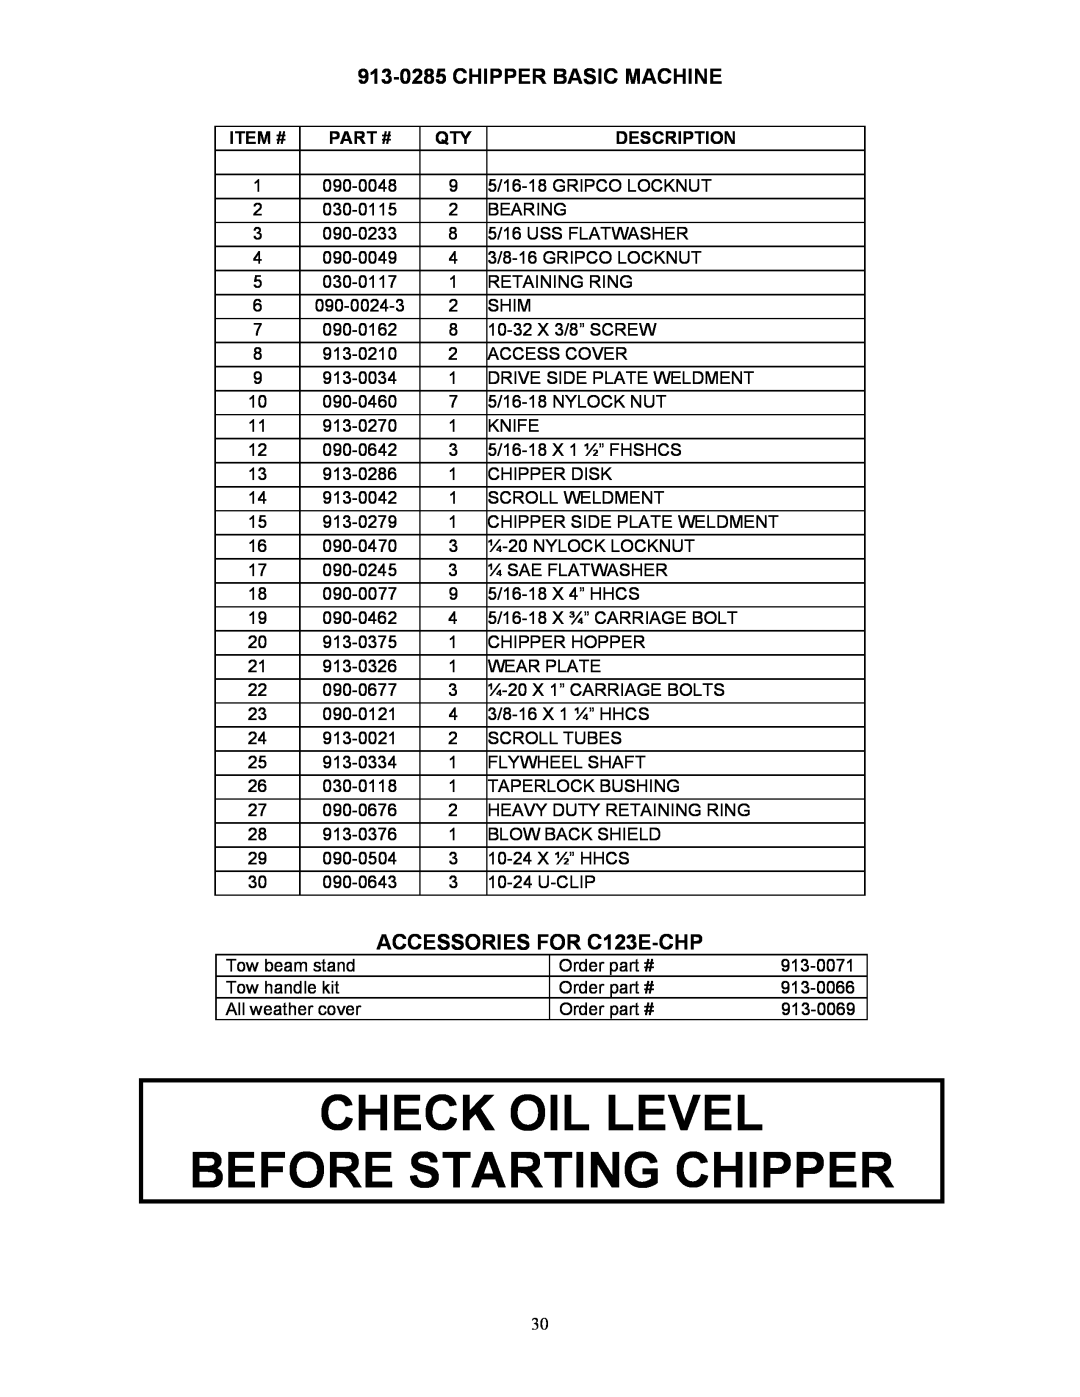 Country Home Products C123E-CHP instruction manual Check Oil Level Before Starting Chipper, 913-0285CHIPPER BASIC MACHINE 